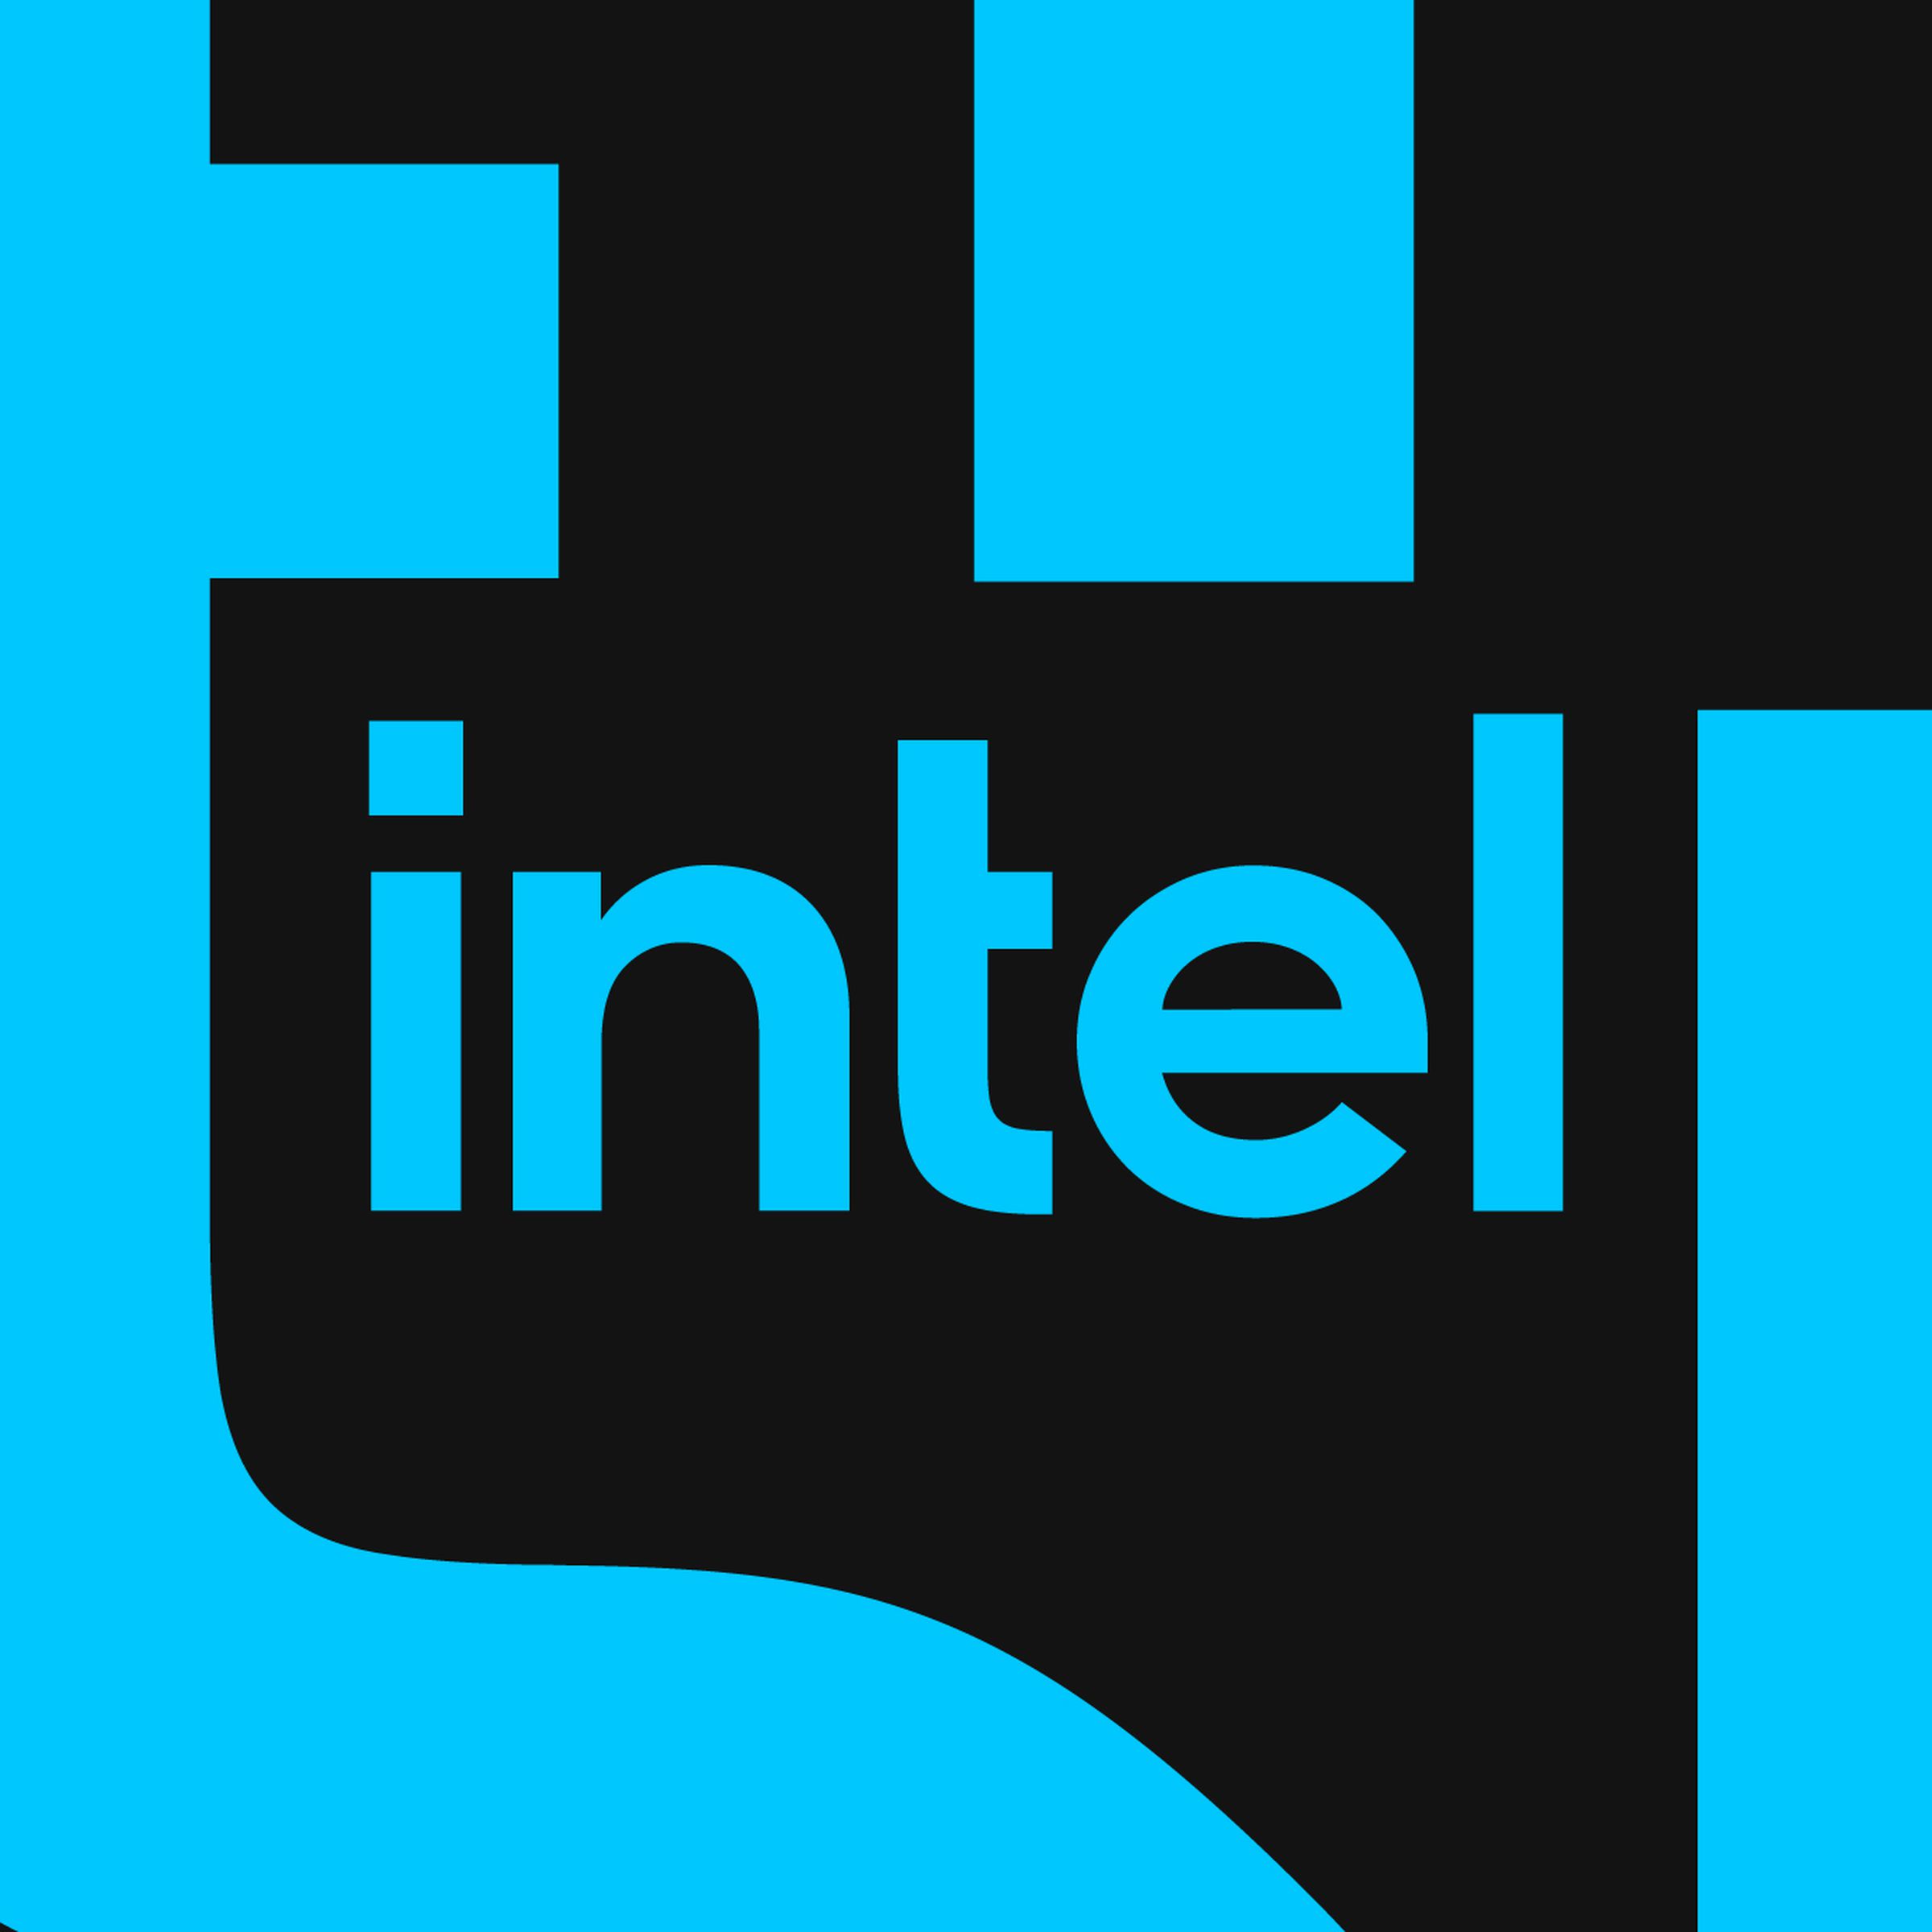 A blue and black illustration of the Intel logo